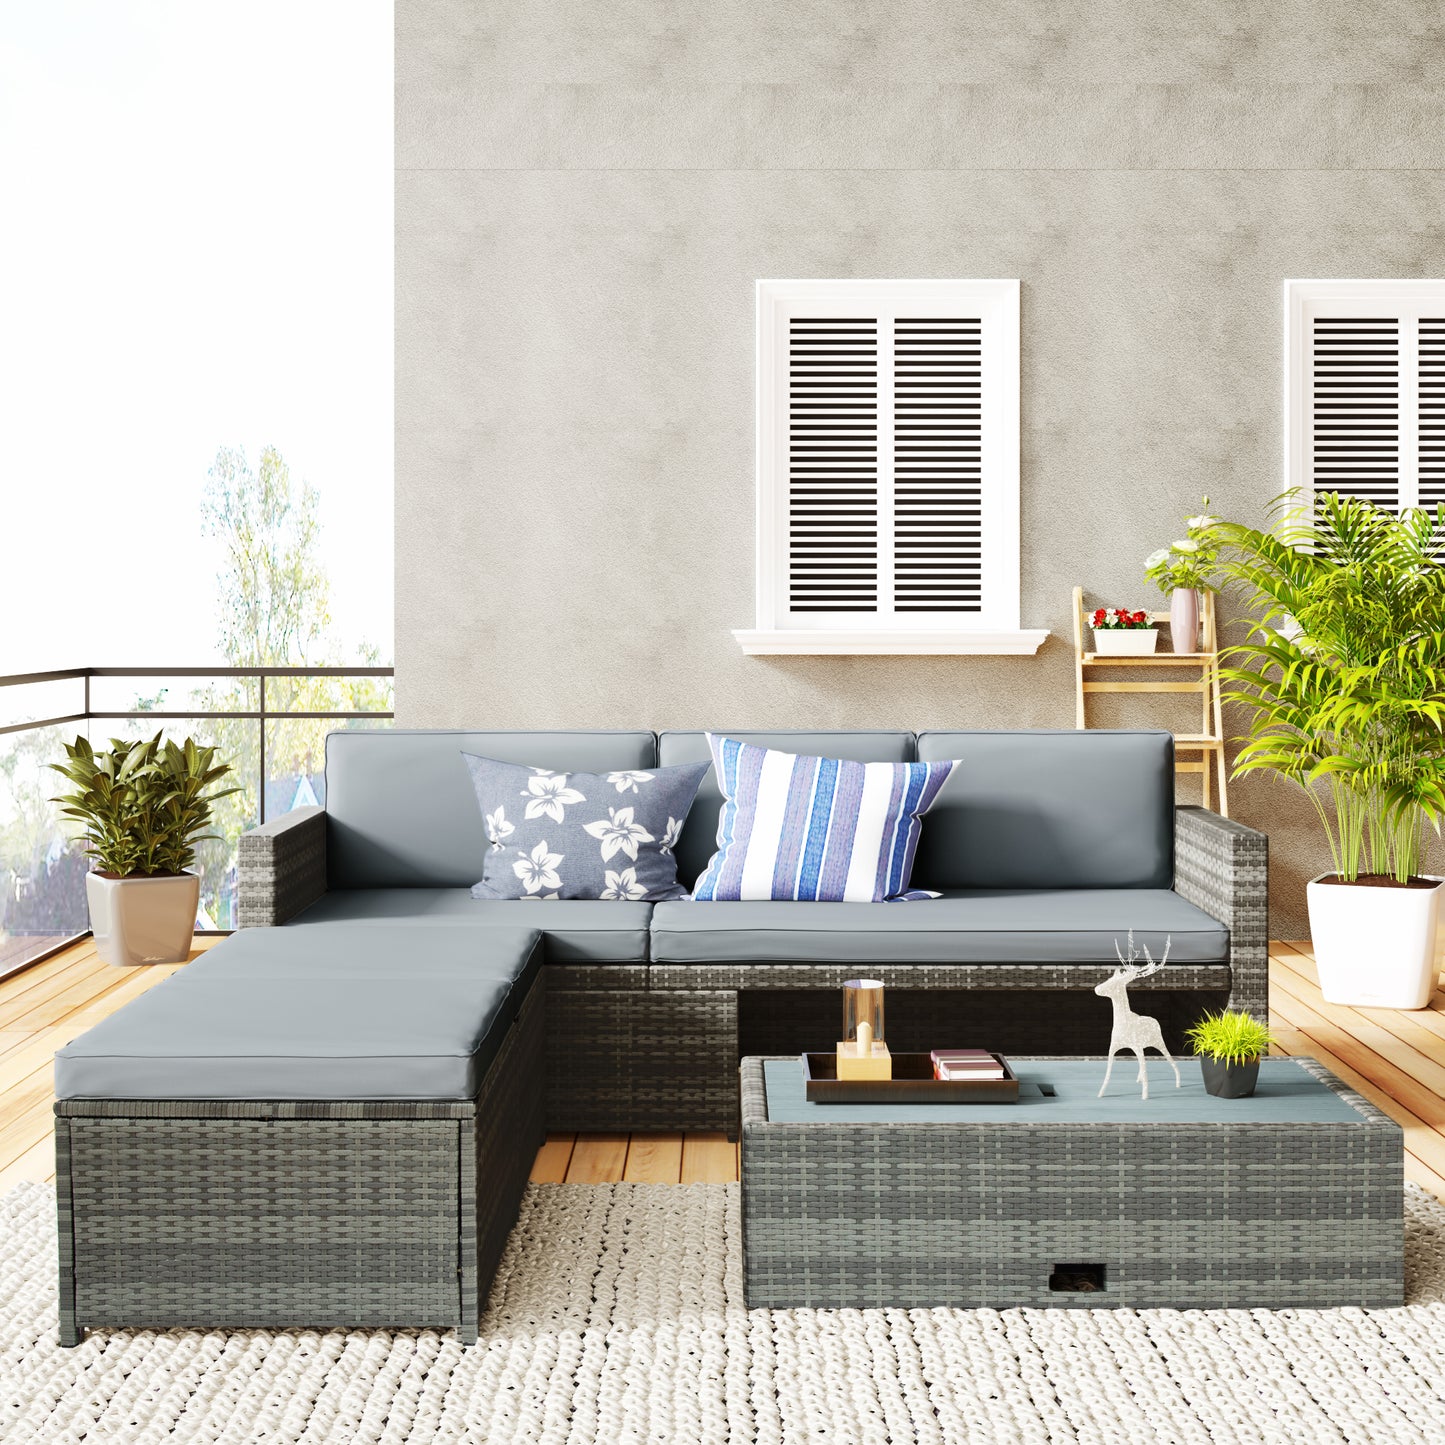 SYNGAR Gray 4 Piece Patio Wicker Furniture Set, UV Proof Rattan Outdoor Sectional Sofa Set with Retractable Table, Space Saving Conversation Bistro Set for Garden Balcony Backyard Poolside